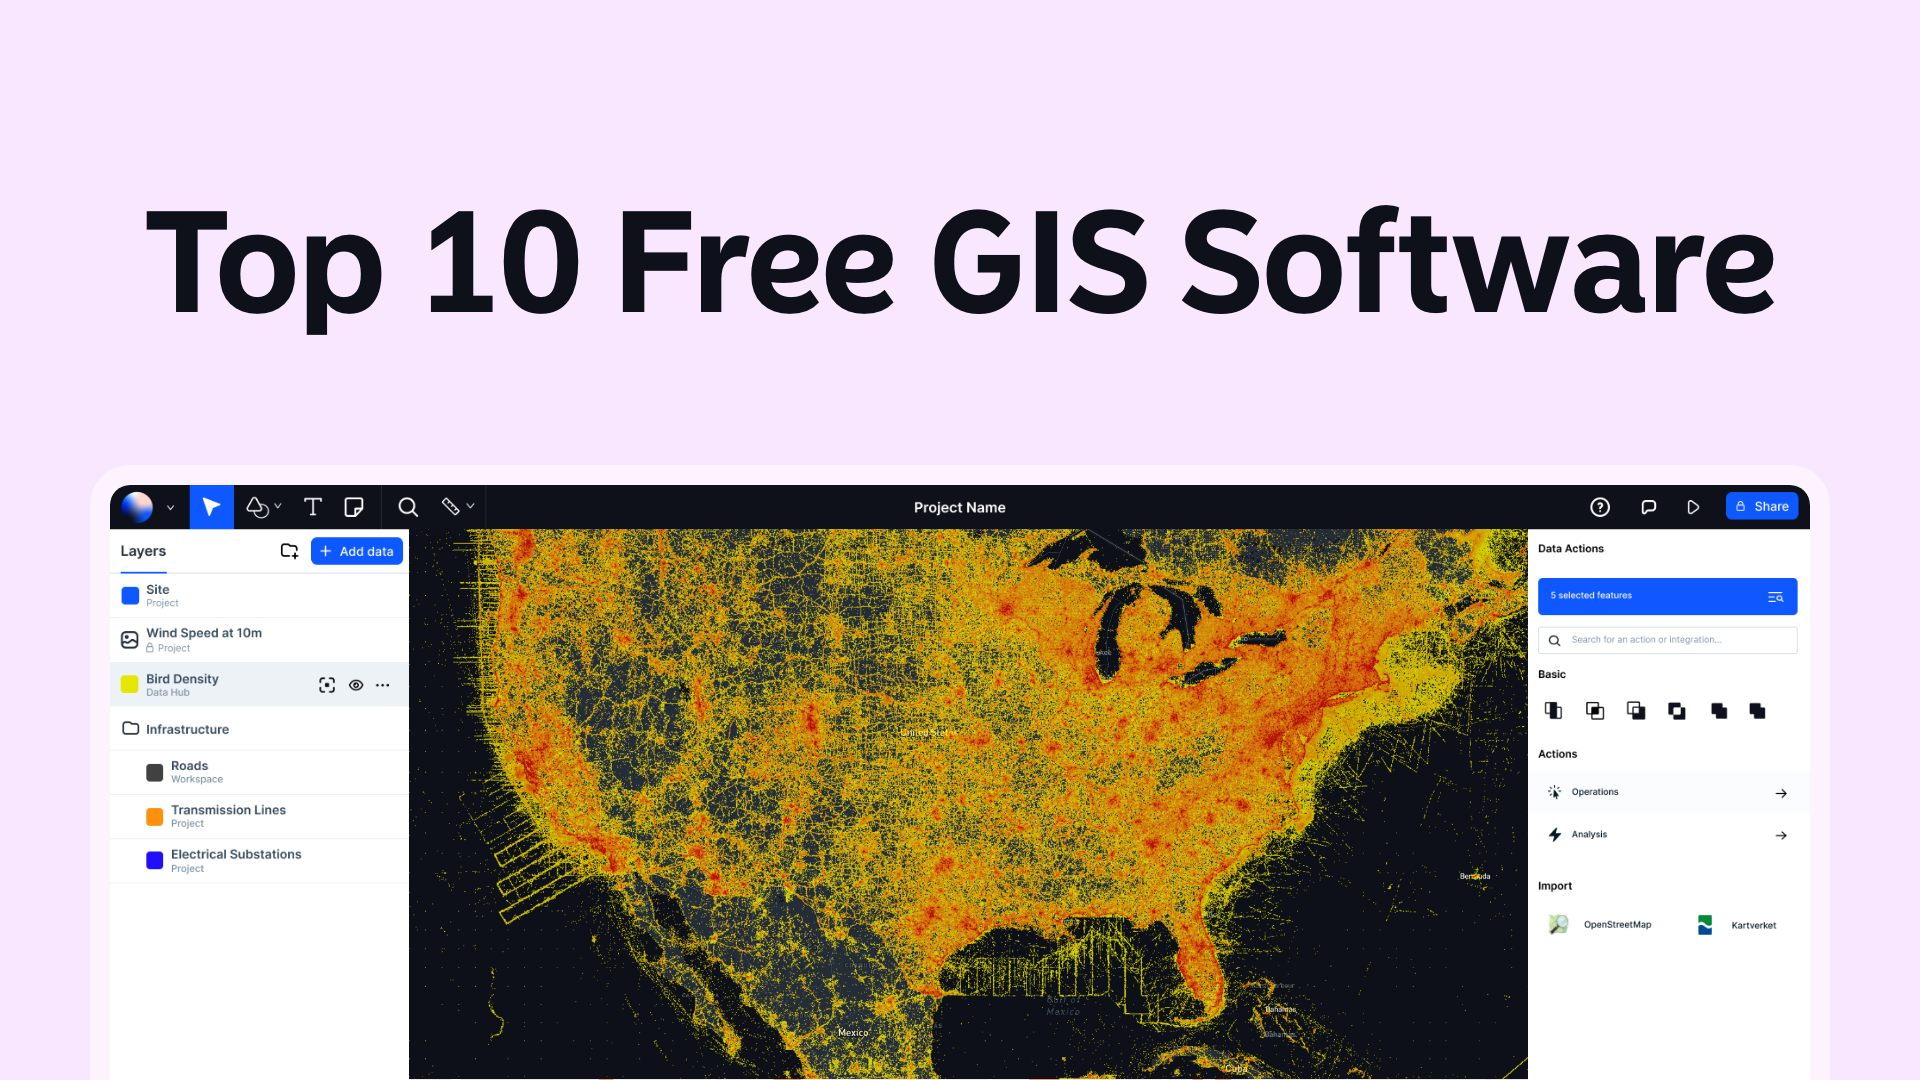 Top 10 Free GIS Software